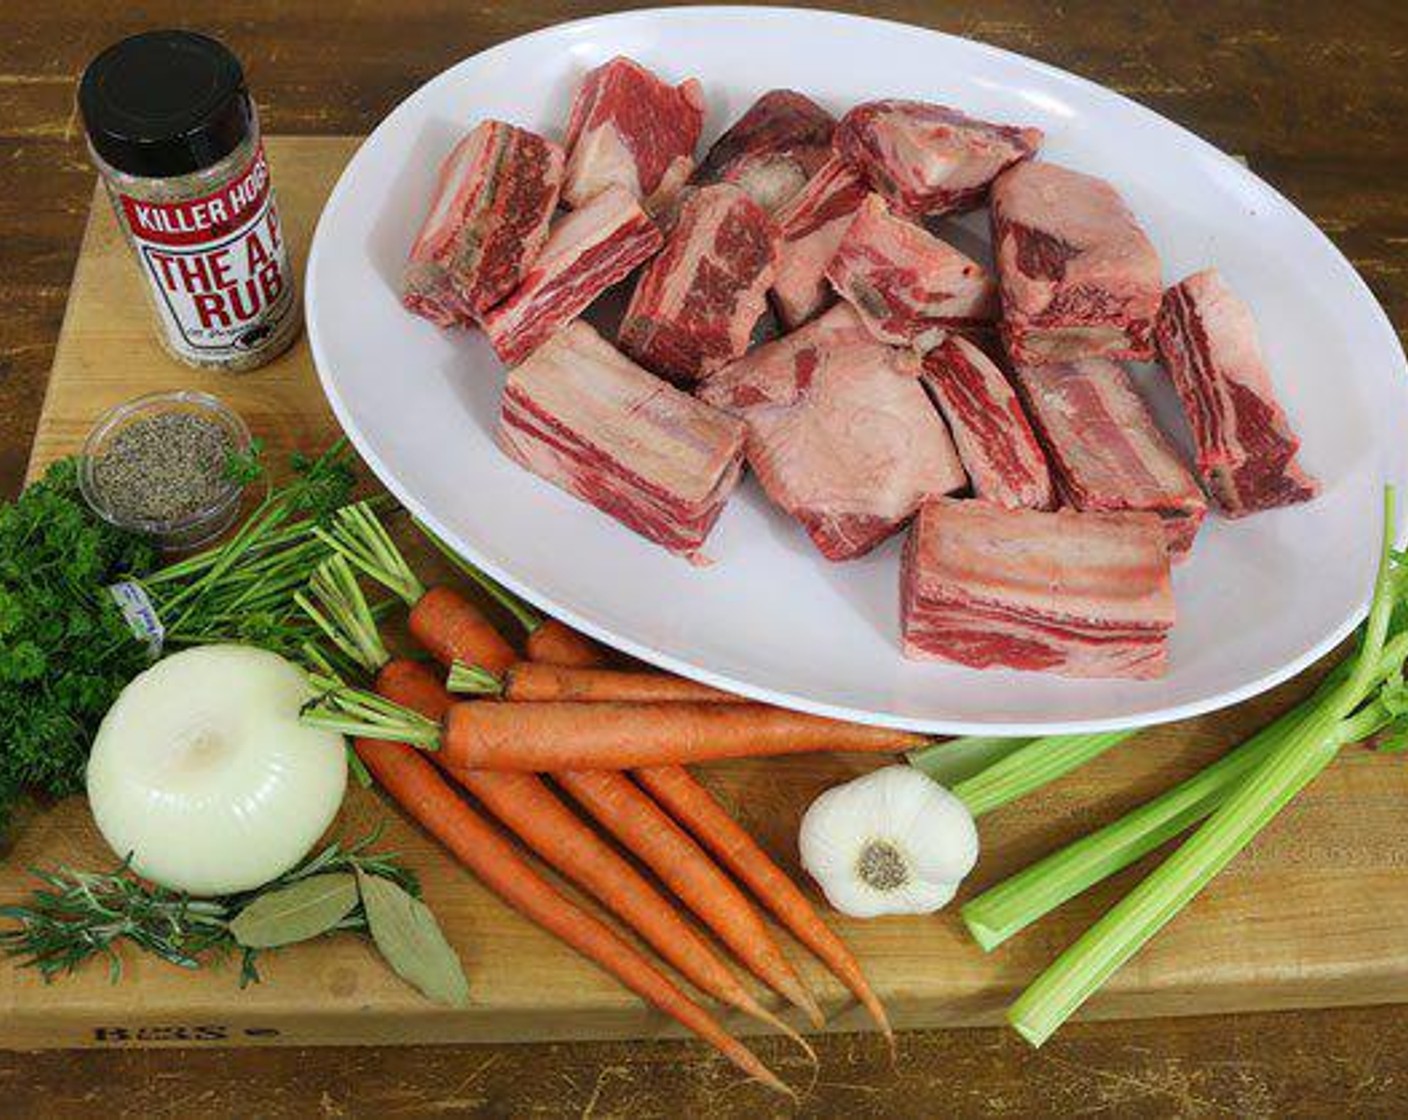 step 3 Chop Carrots (3), Celery (3 stalks), and Onion (1) into large chunks. Place in a full size steam pan. Smash Garlic (8 cloves) and add to pan. Pour in Beef Stock (4 cups) and Red Wine (2 cups). Add Tomato Paste (2/3 cup) and stir to disperse. Season with All-Purpose Spice Rub (1/4 cup) and add Fresh Rosemary (2 sprigs) and Bay Leaf (1).